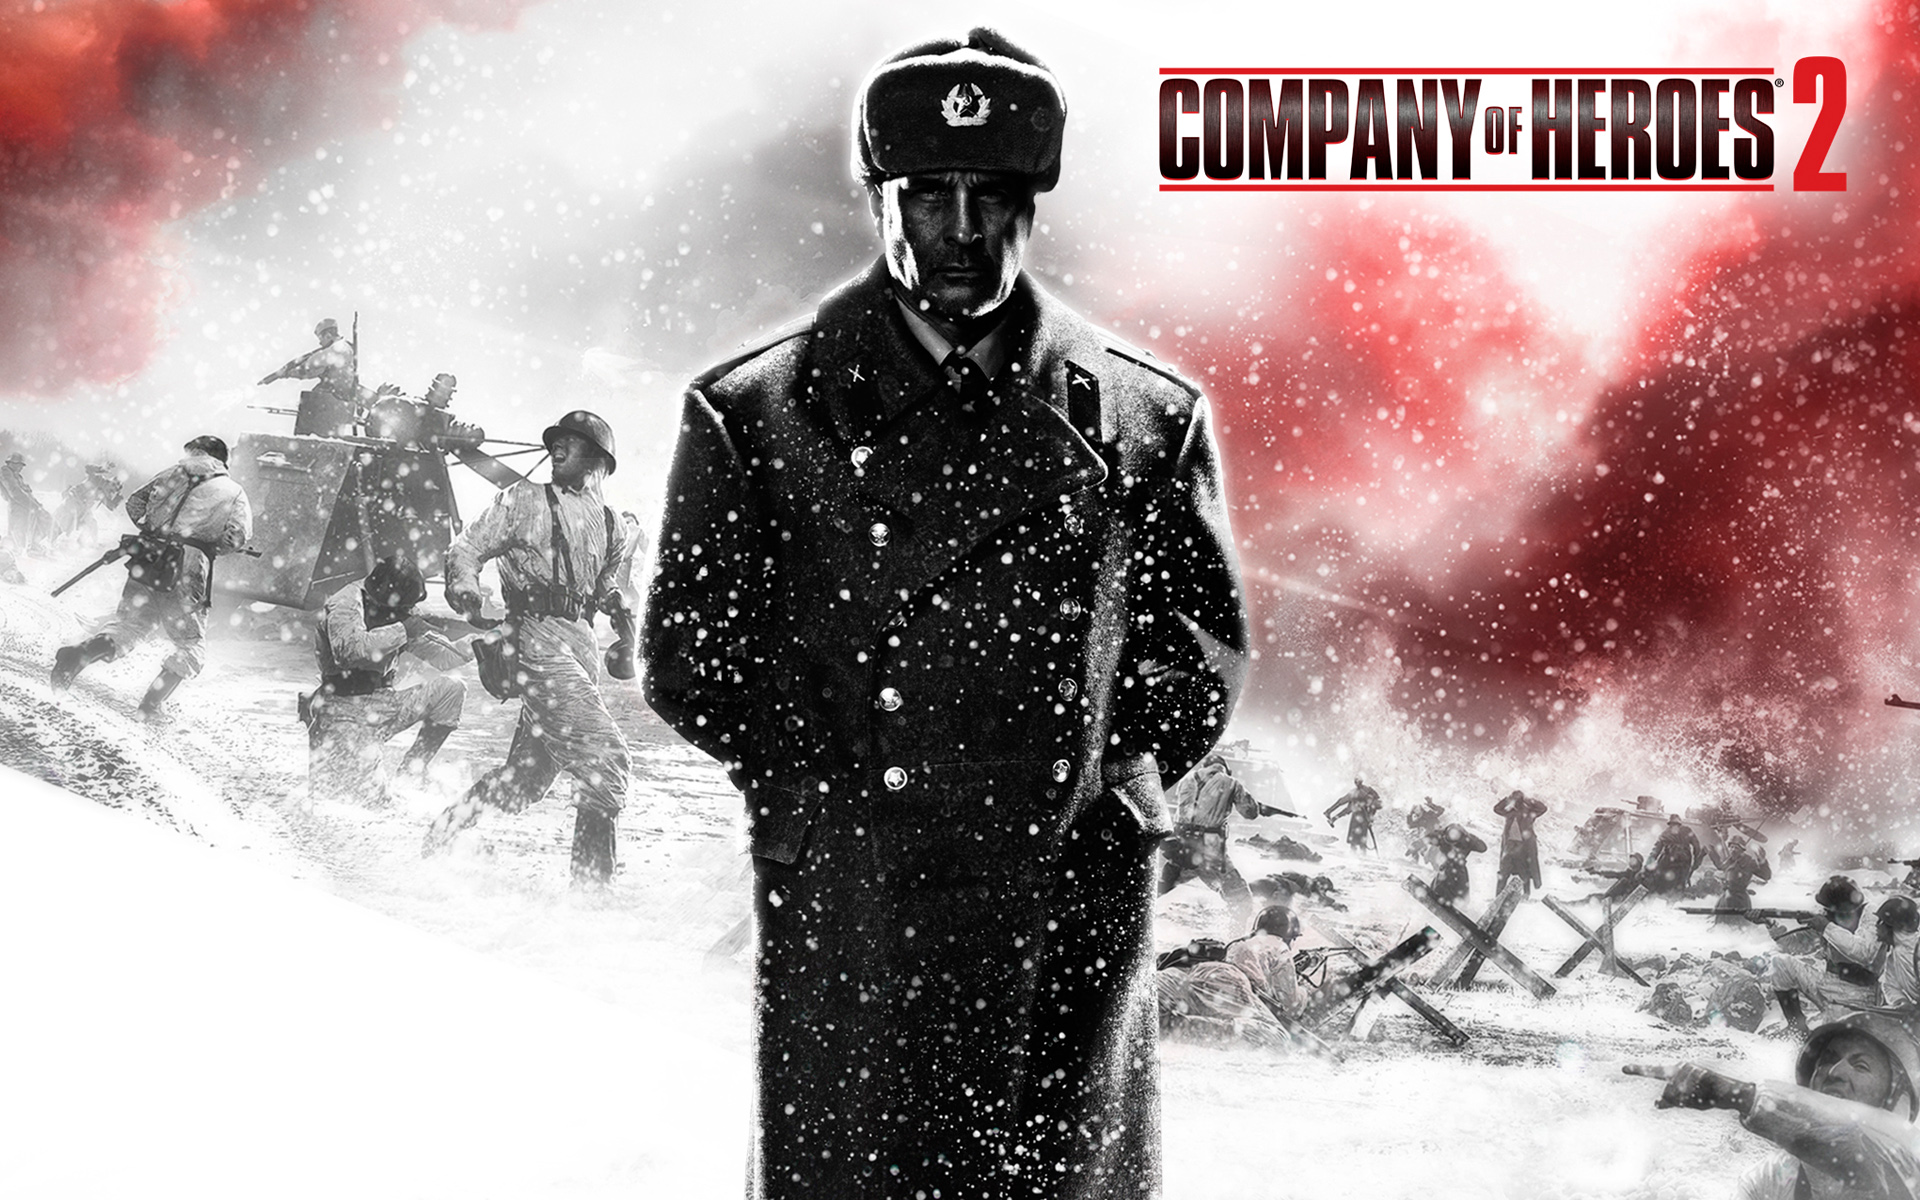 company of heroes wallpaper,winter storm,blizzard,illustration,poster,personal protective equipment